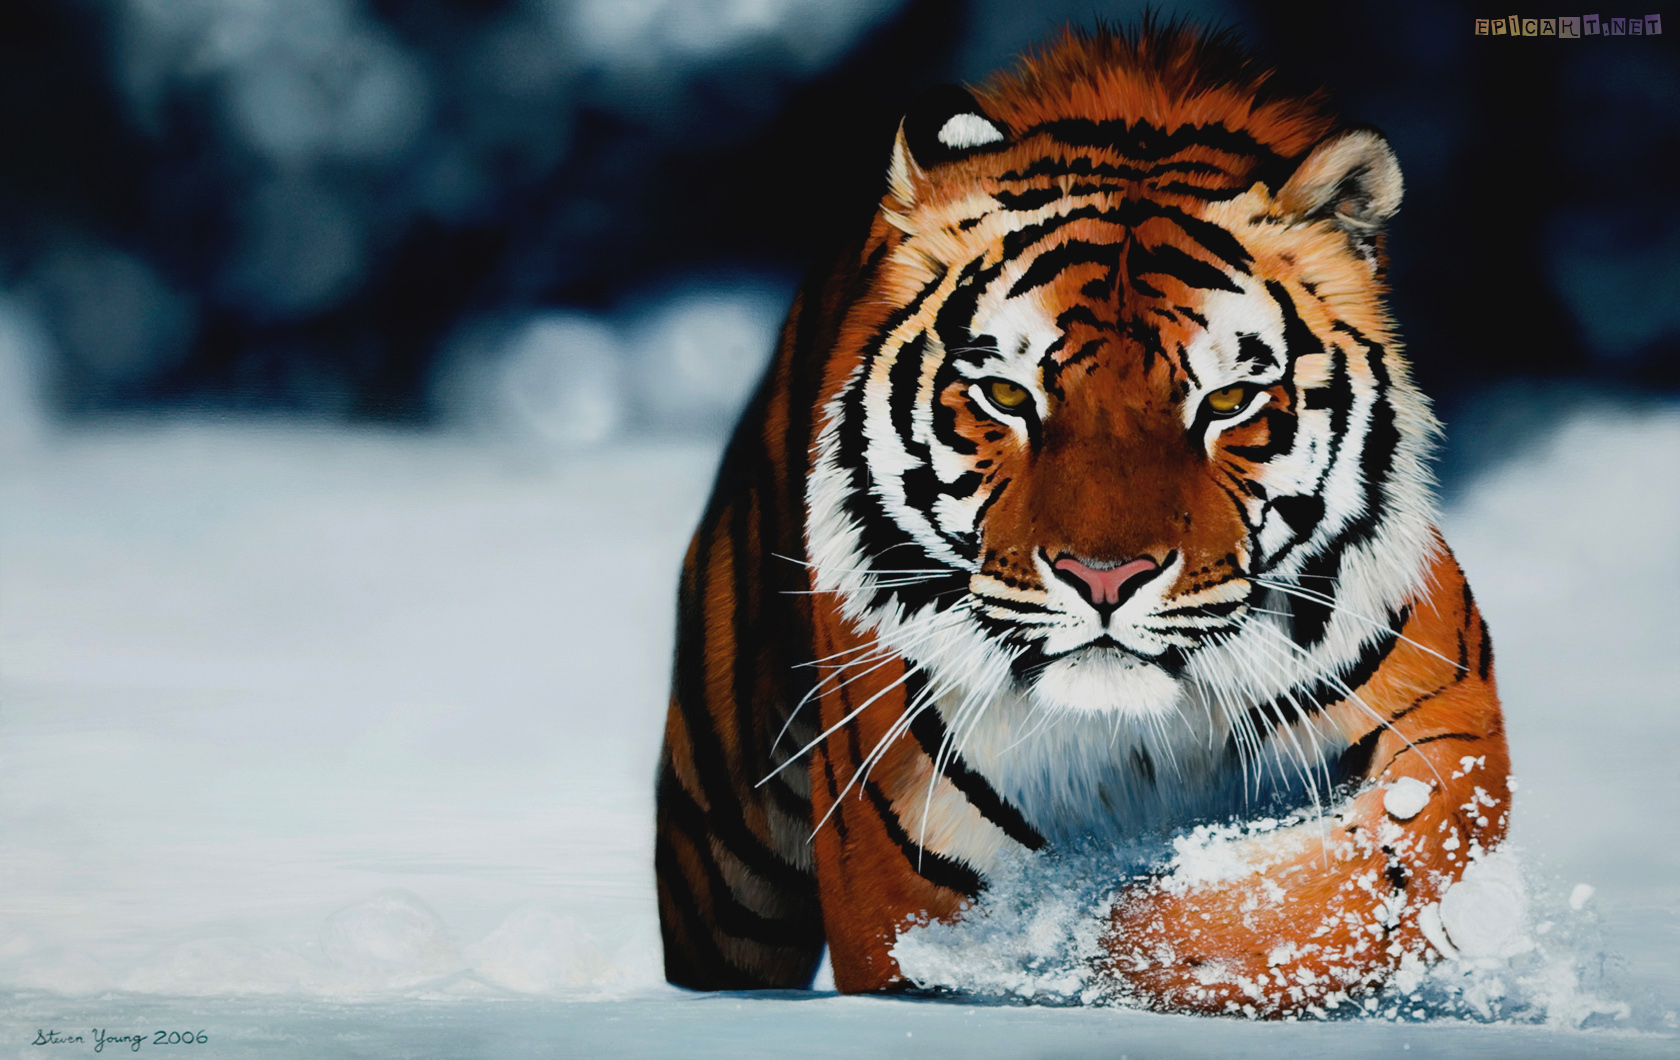 Awesome Tiger Picture New Desktop Hd Wallpapers Of Tigers | Zoom ...